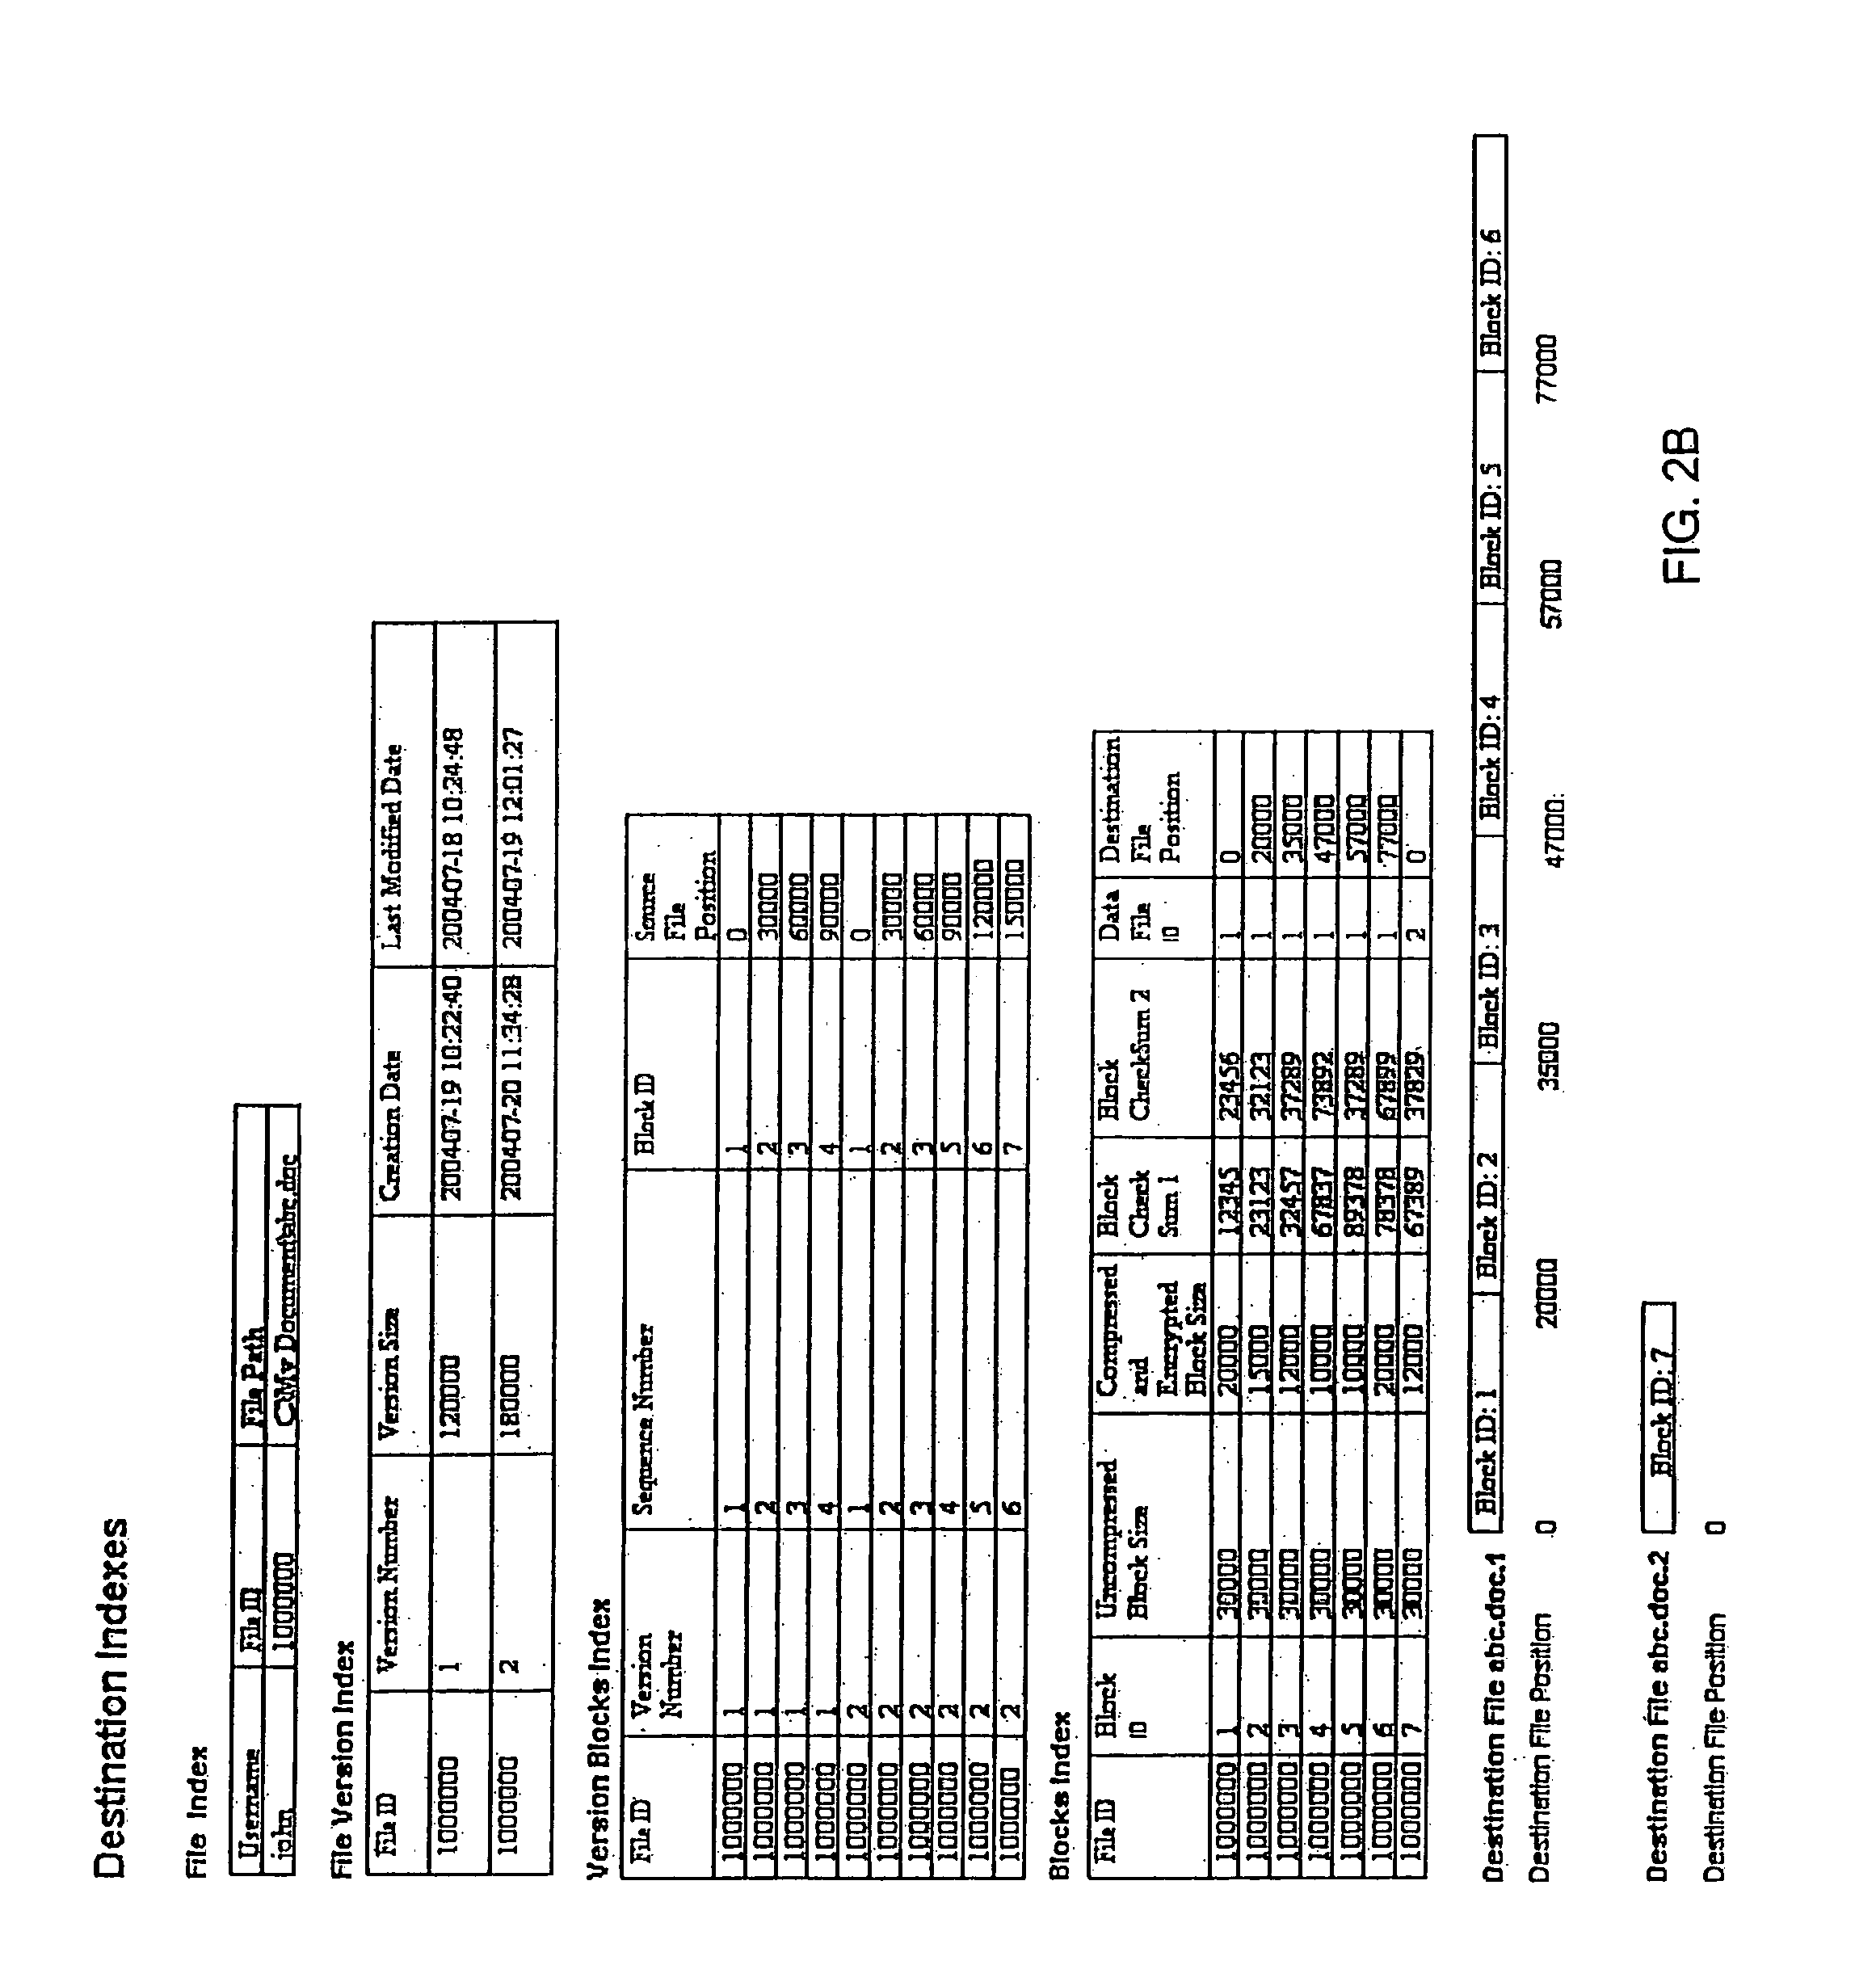 Storing and retrieving computer data files using an encrypted network drive file system